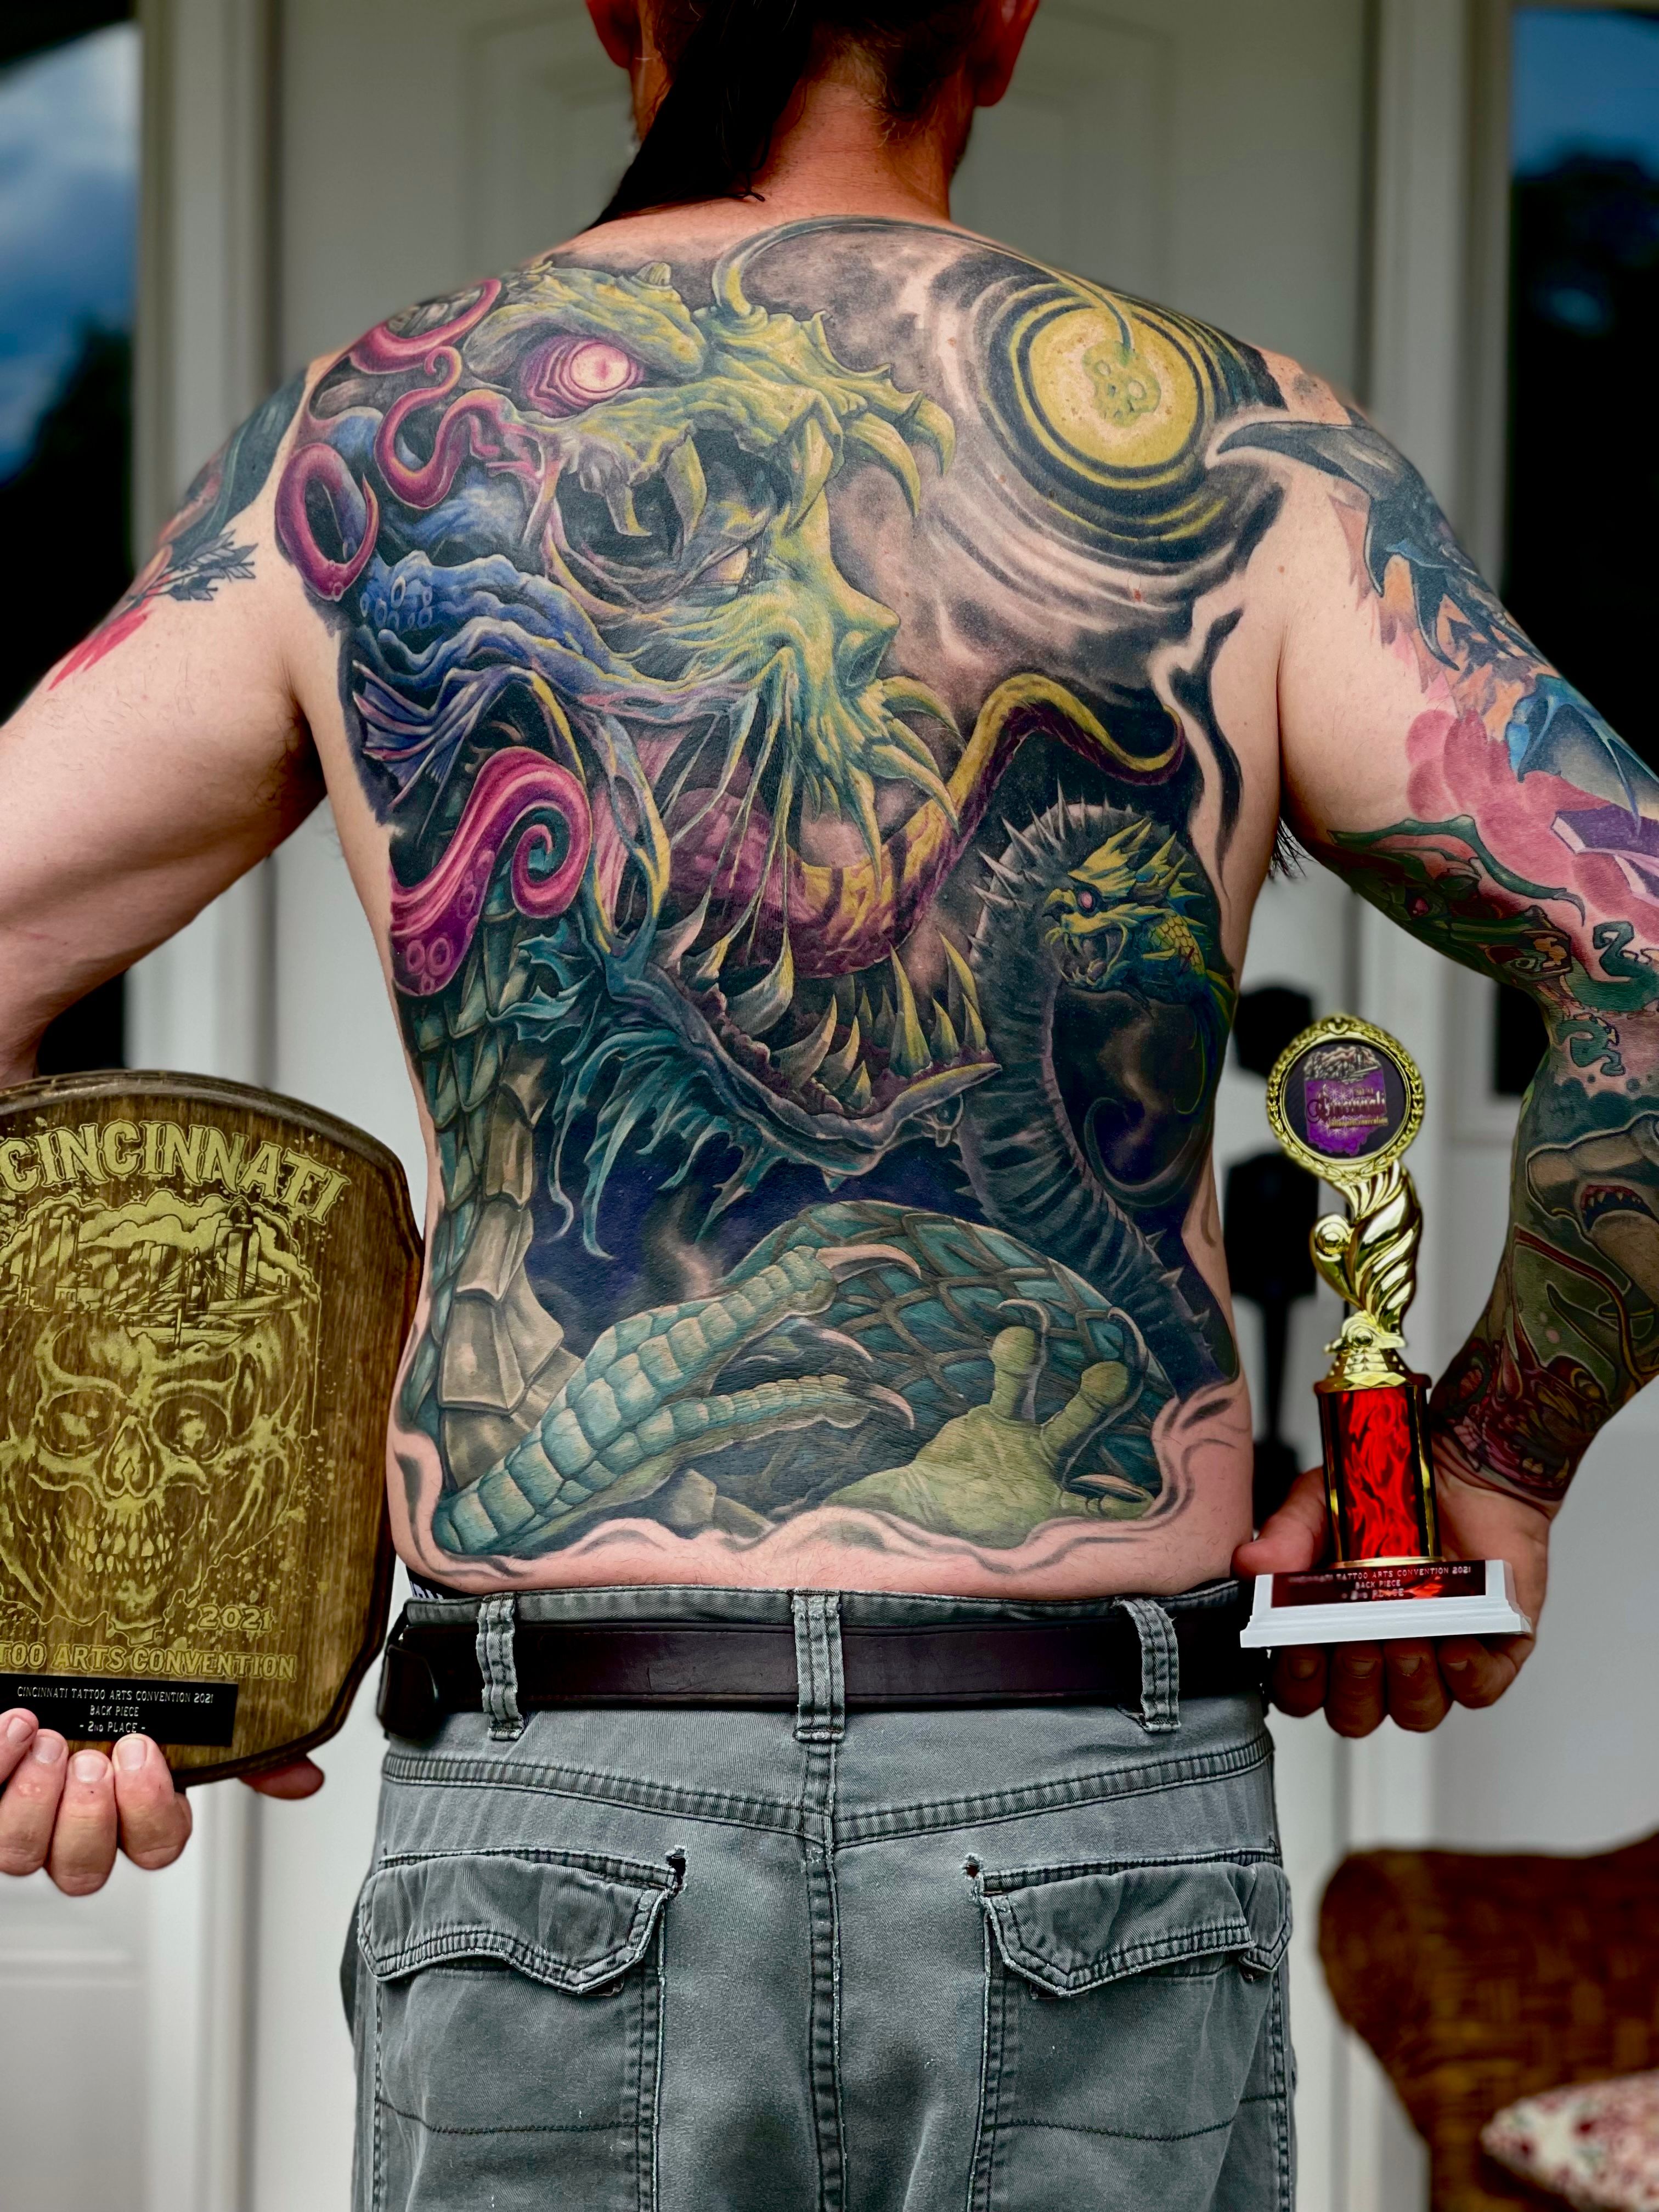 Tattoo Man Is Running Out Of Room  The Gambling Rose Tattoo  Flickr